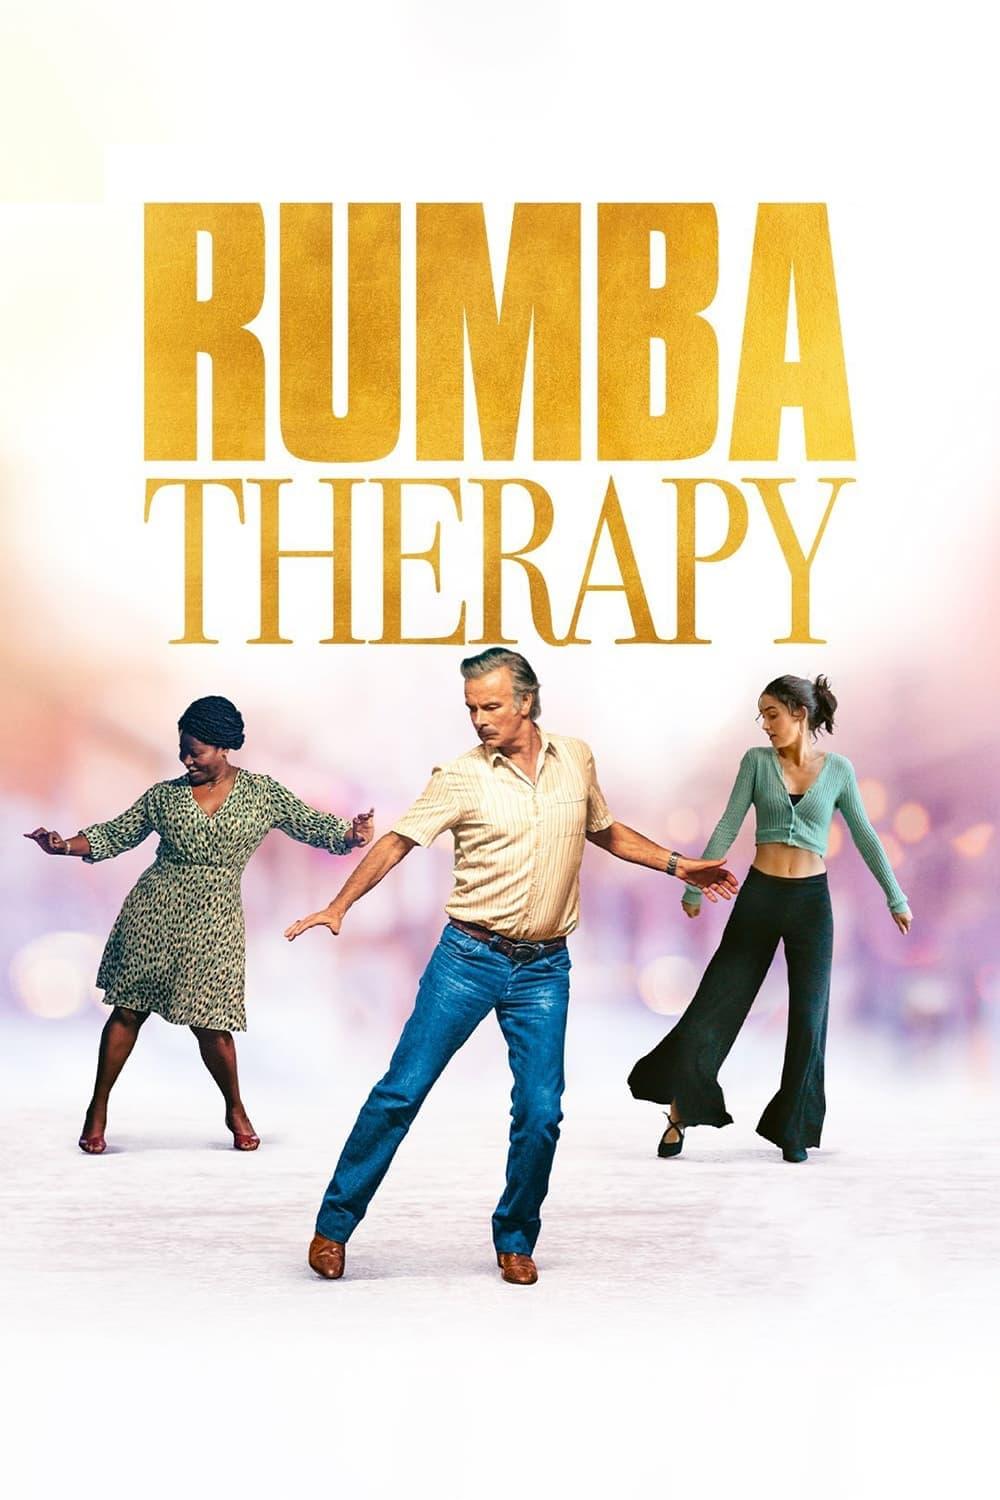 Rumba Therapy poster